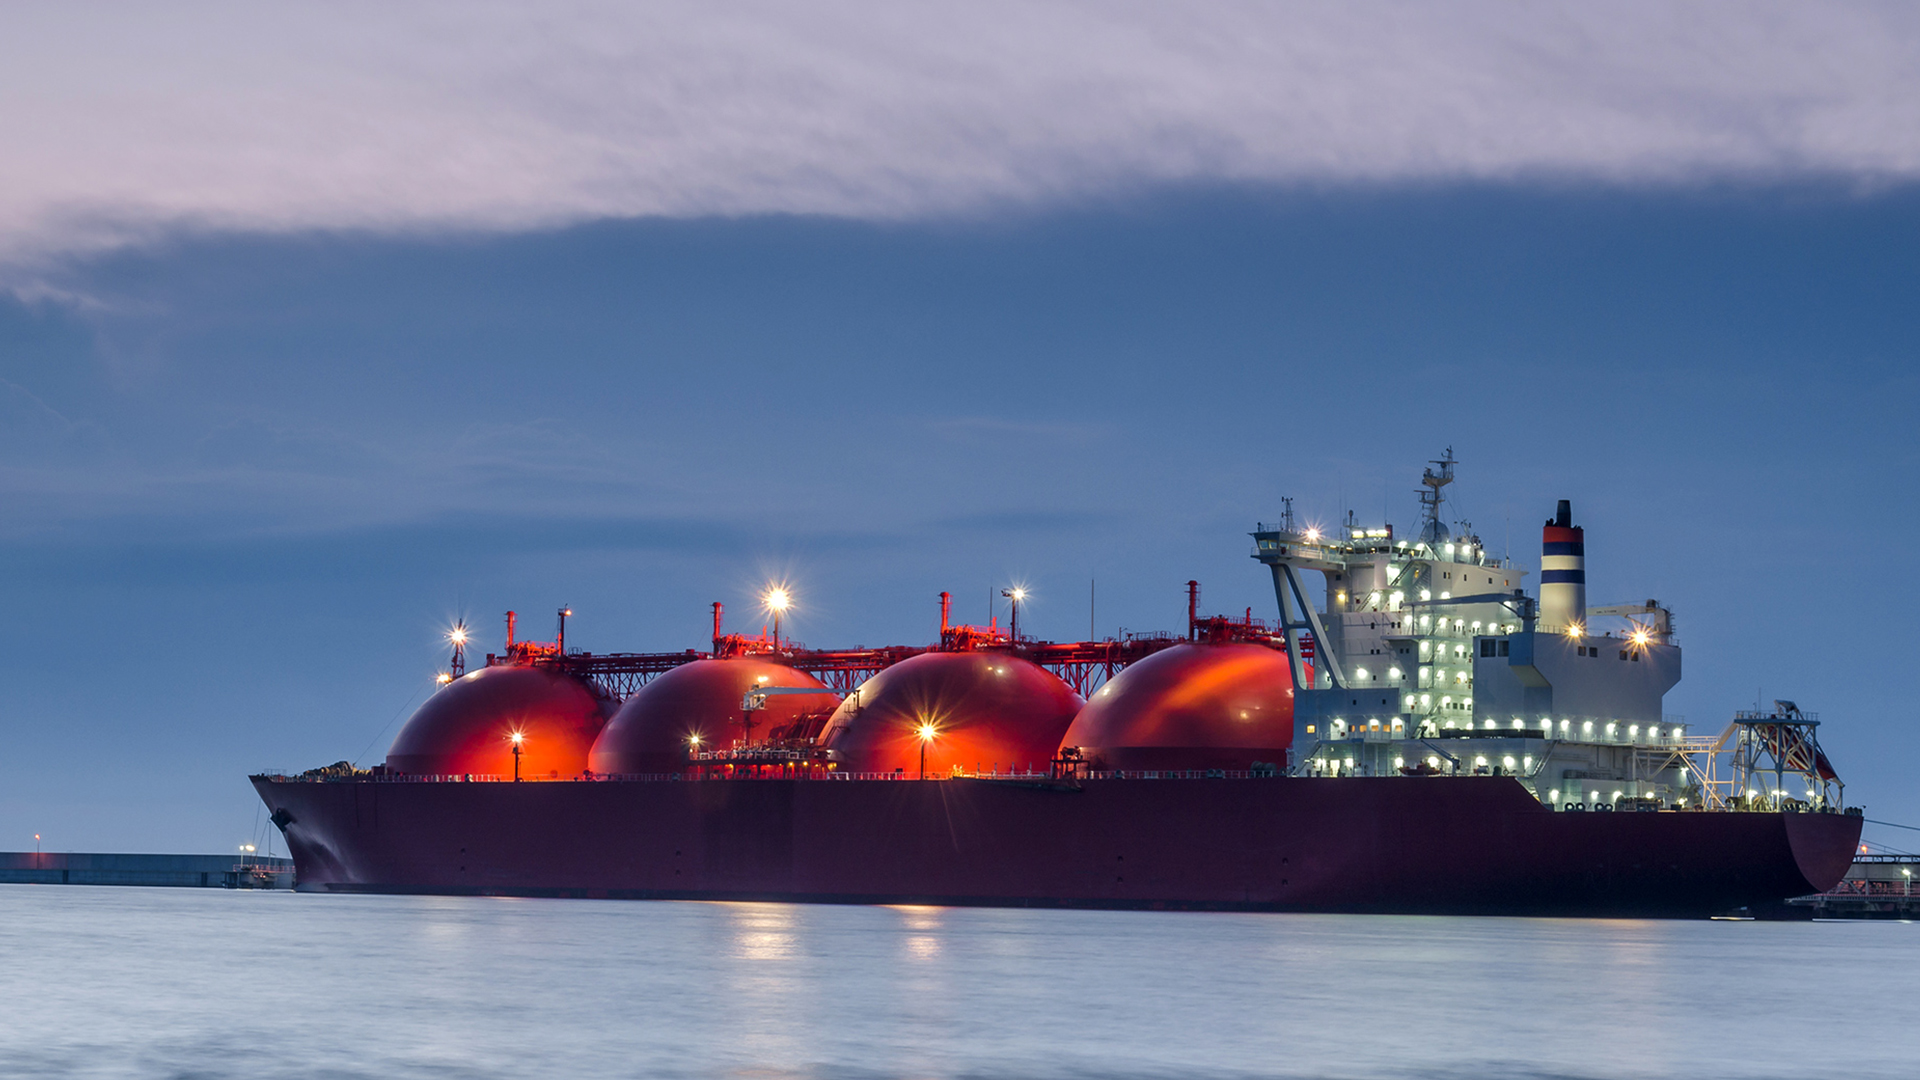 Global LNG Outlook 2020 Global law firm Norton Rose Fulbright